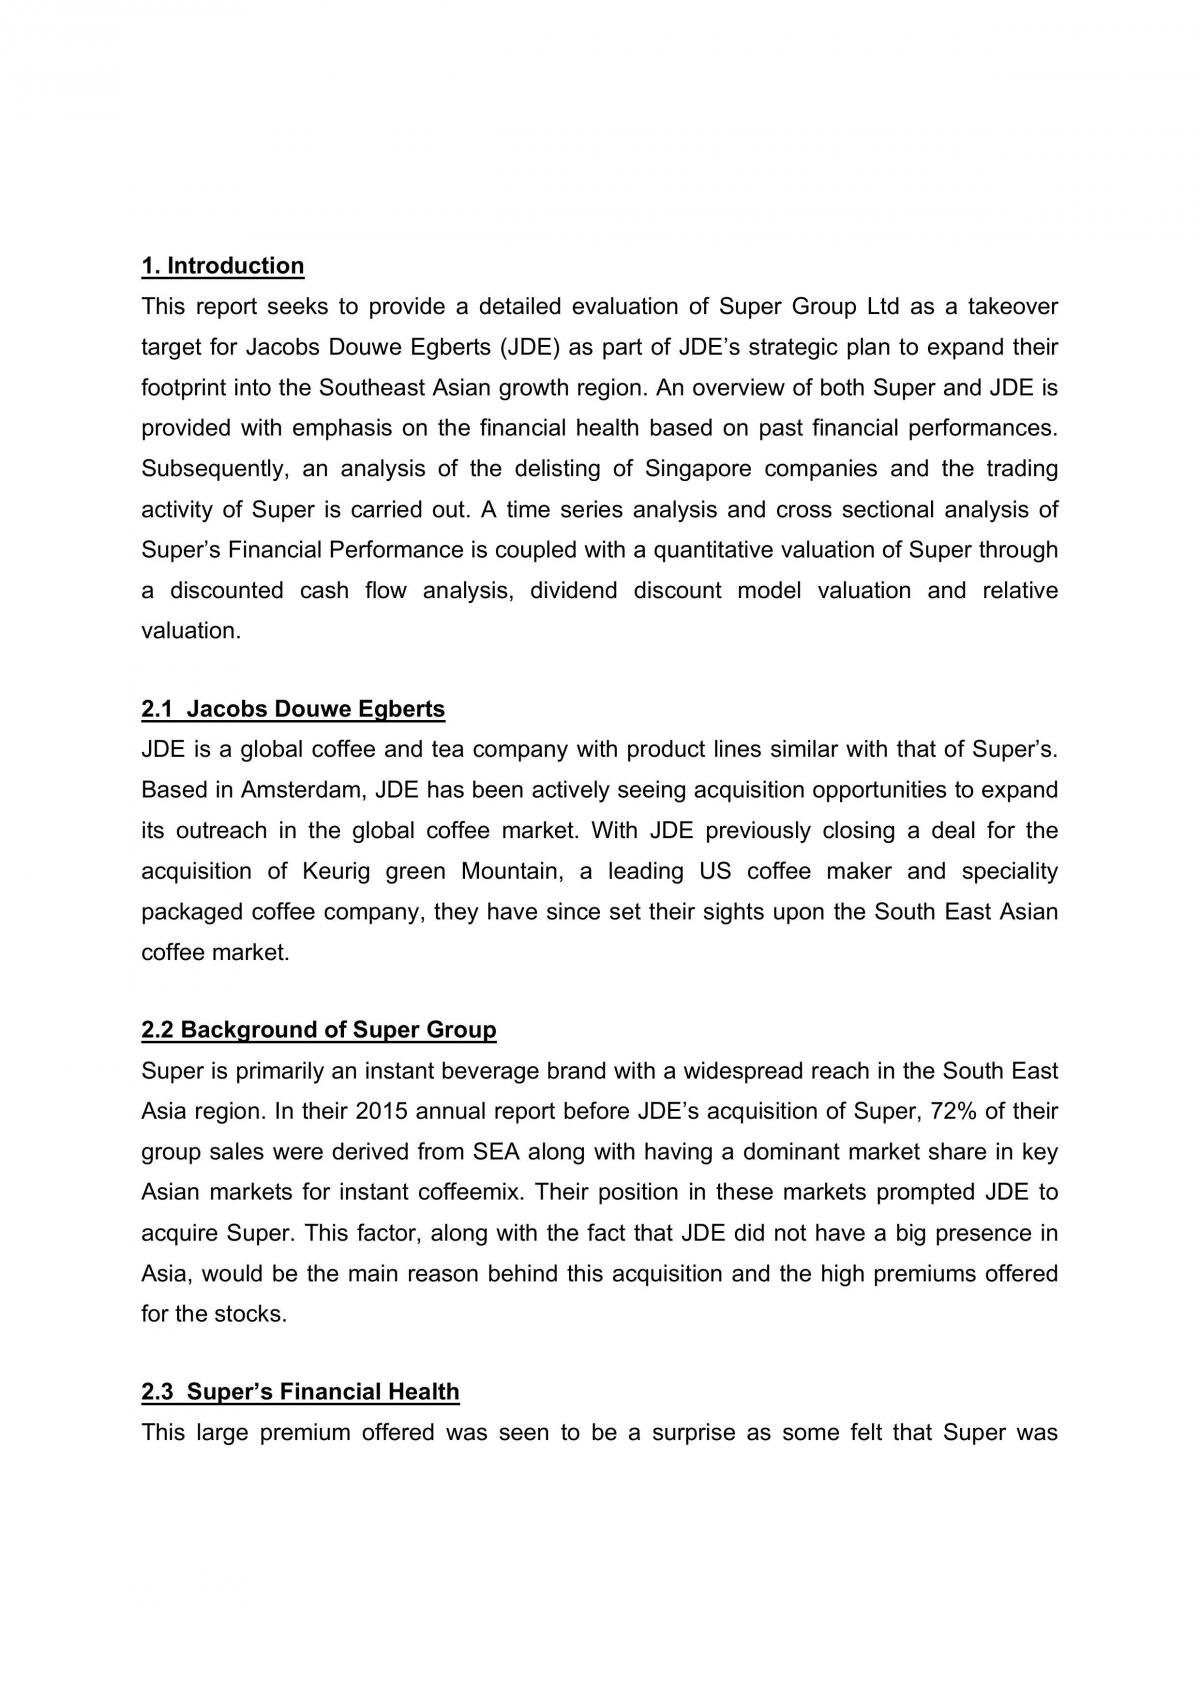 FIN3101 Corporate Finance Case Project Report: JDE - Page 1